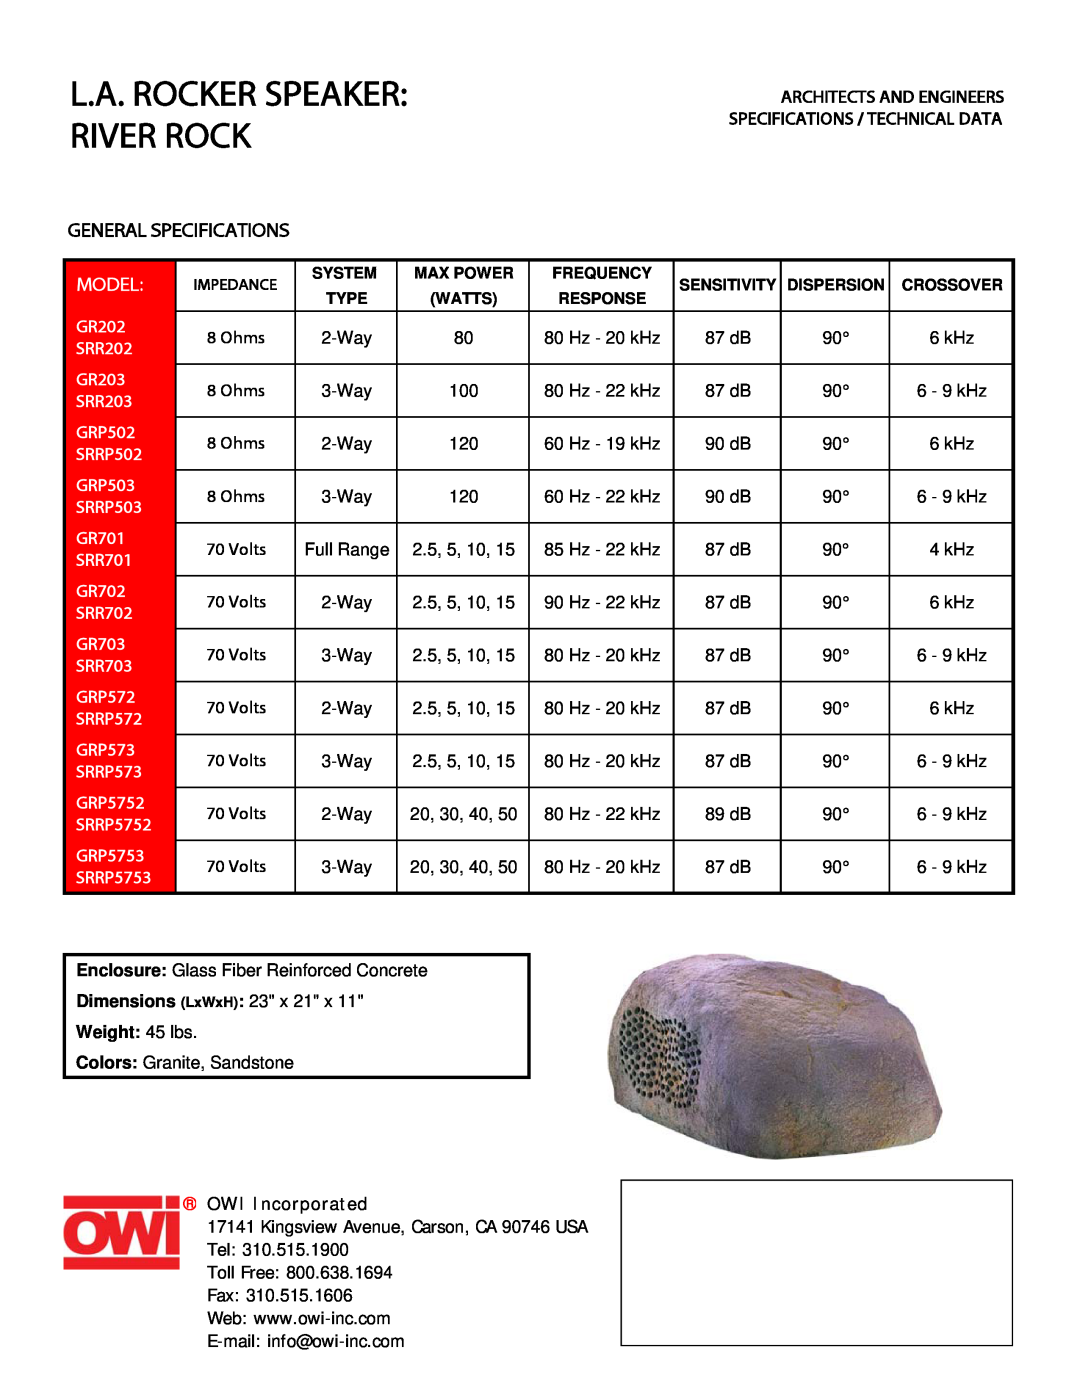 OWI SRRP5753 specifications L.A. Rocker Speaker River Rock, General Specifications, Model, Weight 45 lbs, OWI Incorporated 